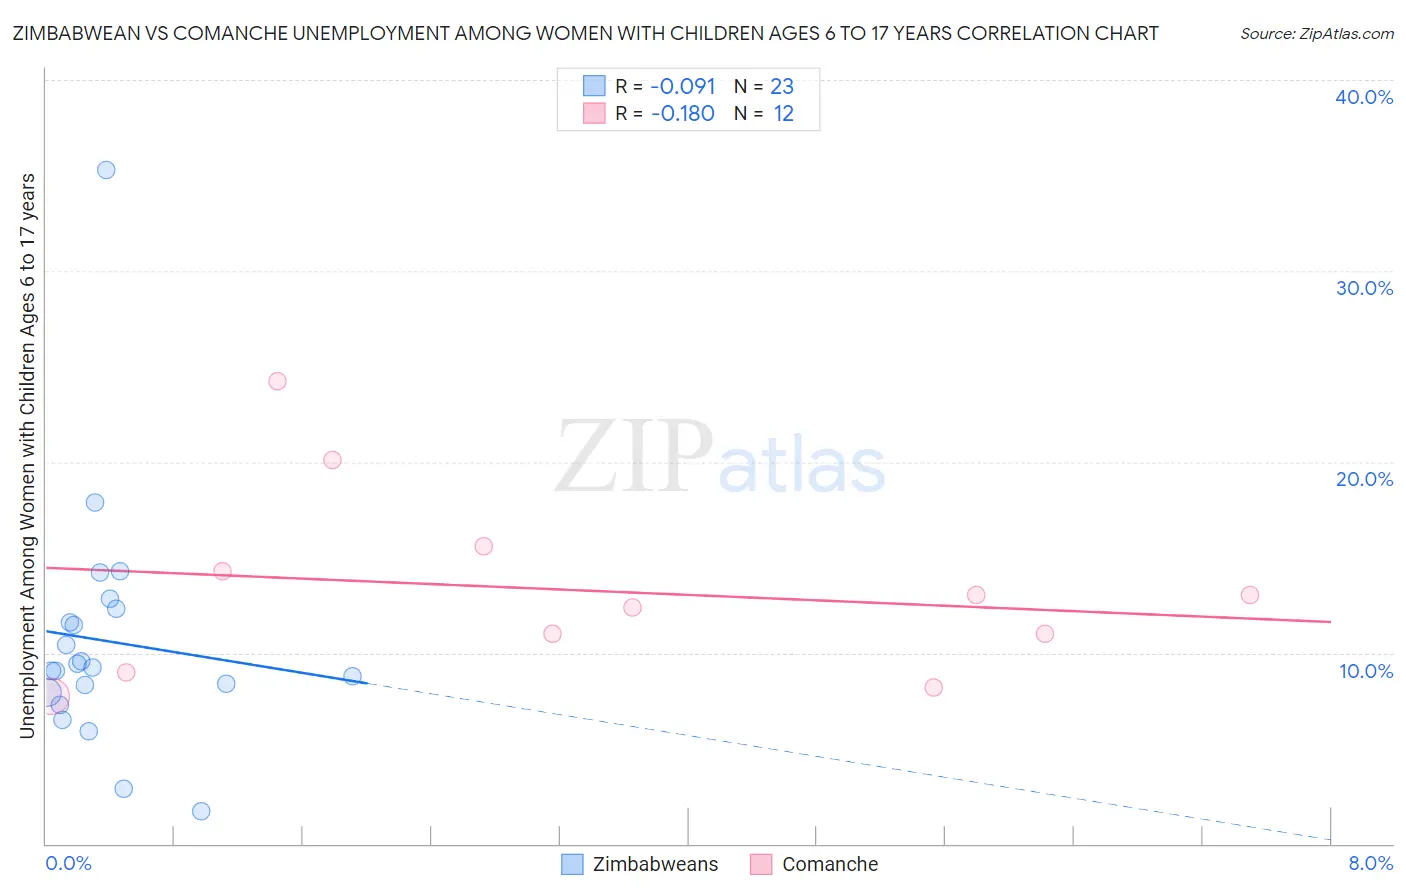 Zimbabwean vs Comanche Unemployment Among Women with Children Ages 6 to 17 years